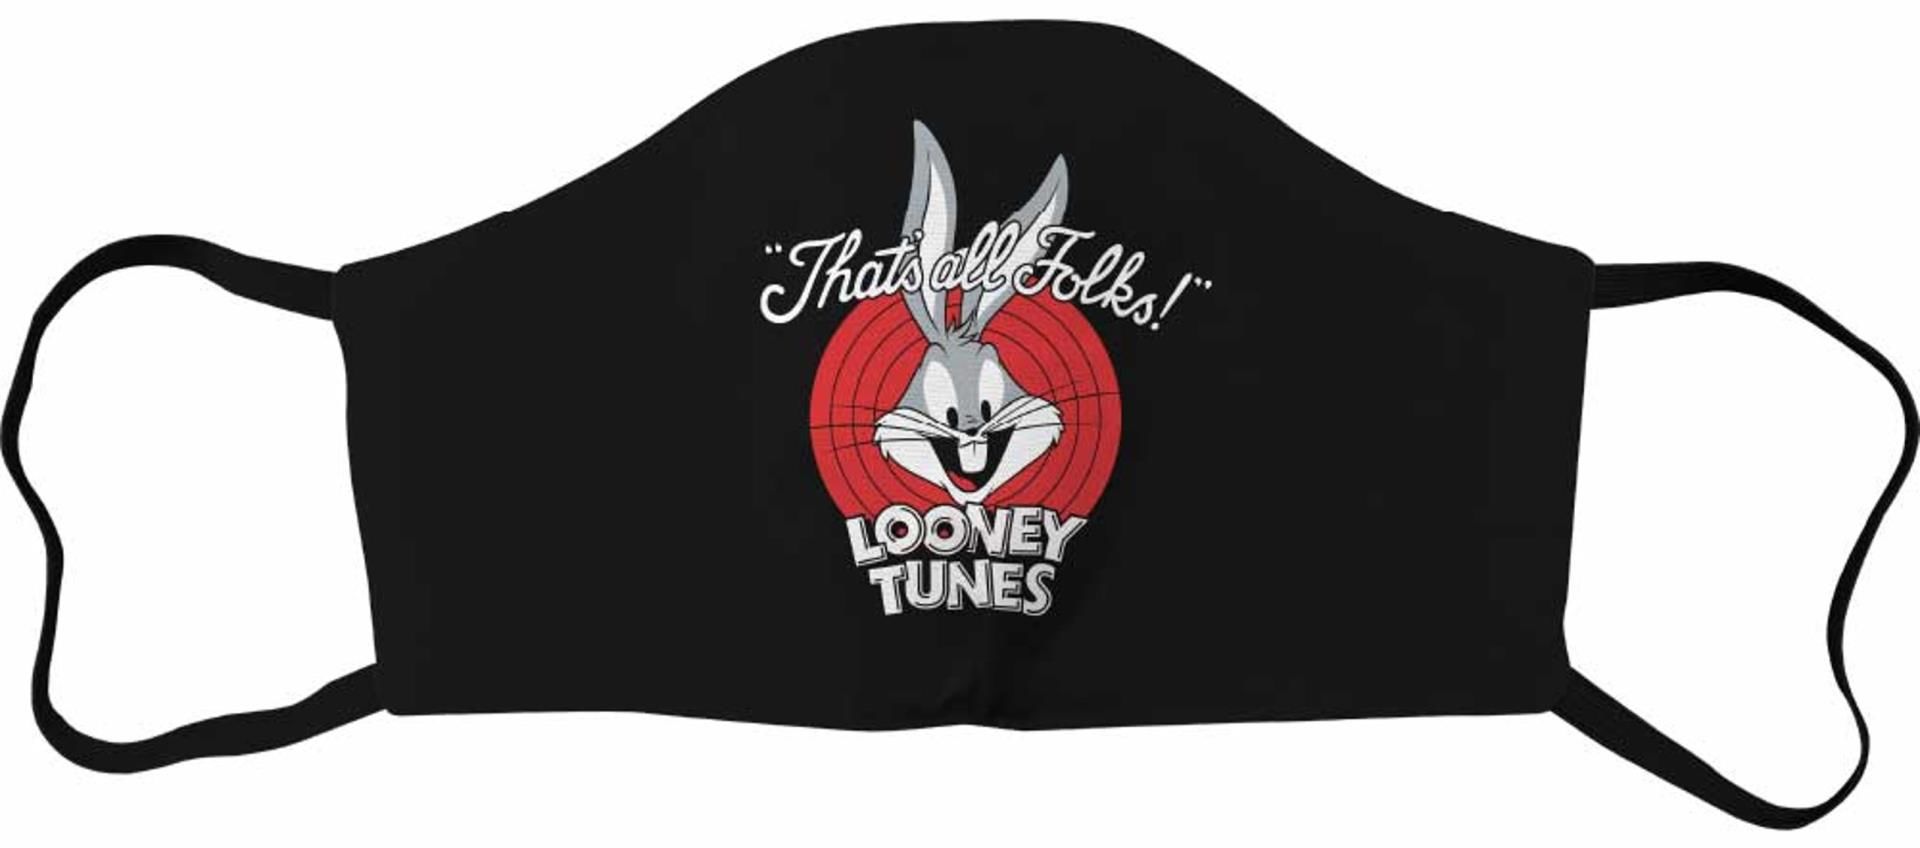 Looney Tunes - Masque Bugs Bunny - Taille Enfant